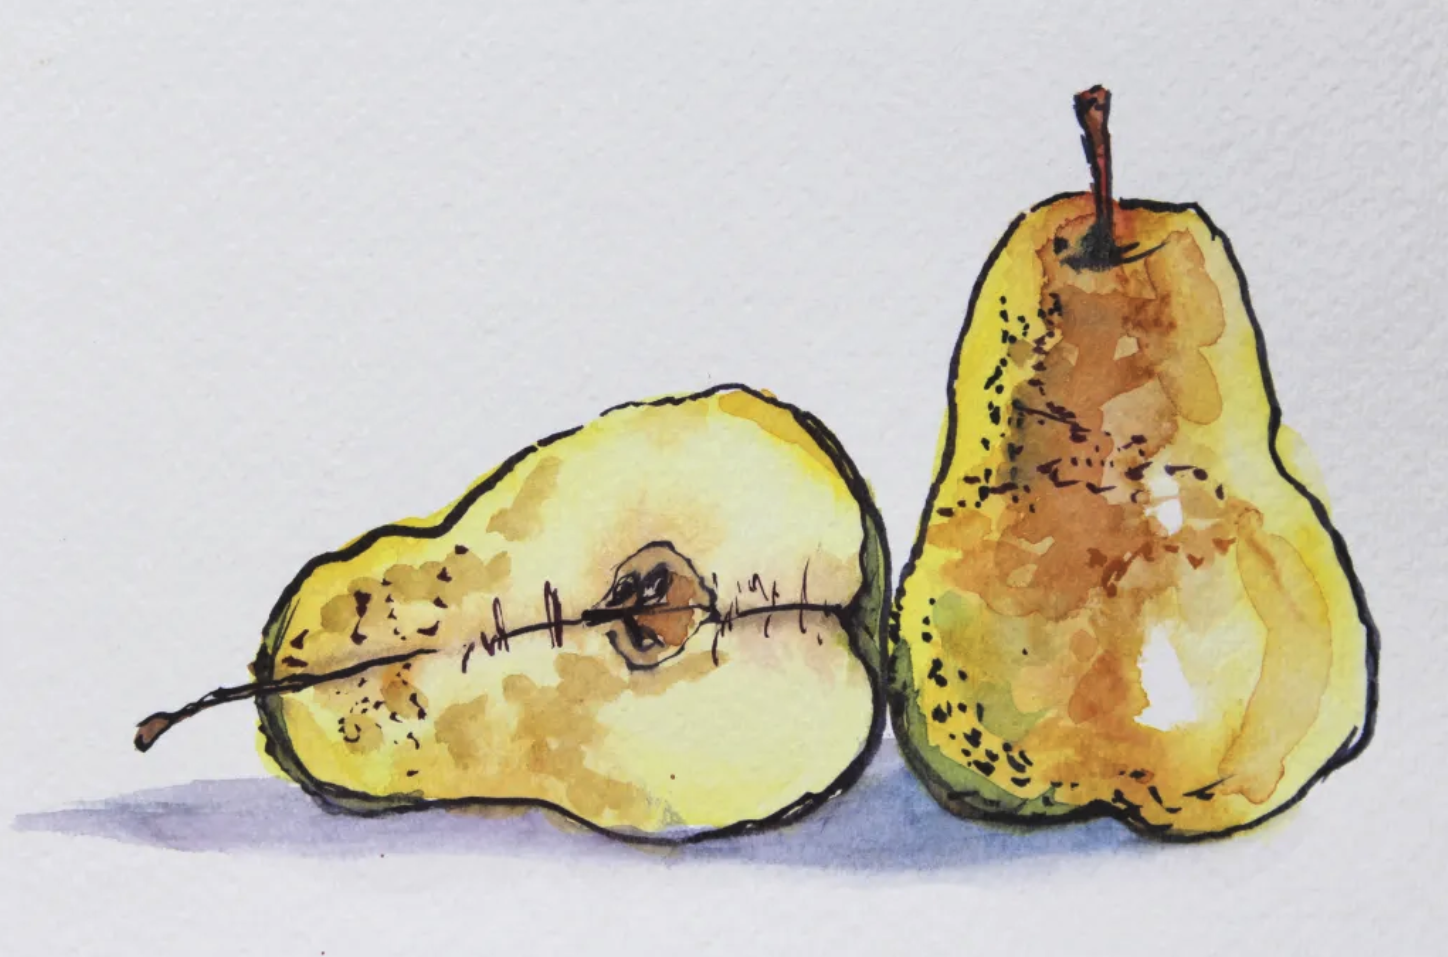 Class Image Watercolors: Still Life Illustrations I | Ages 9-11